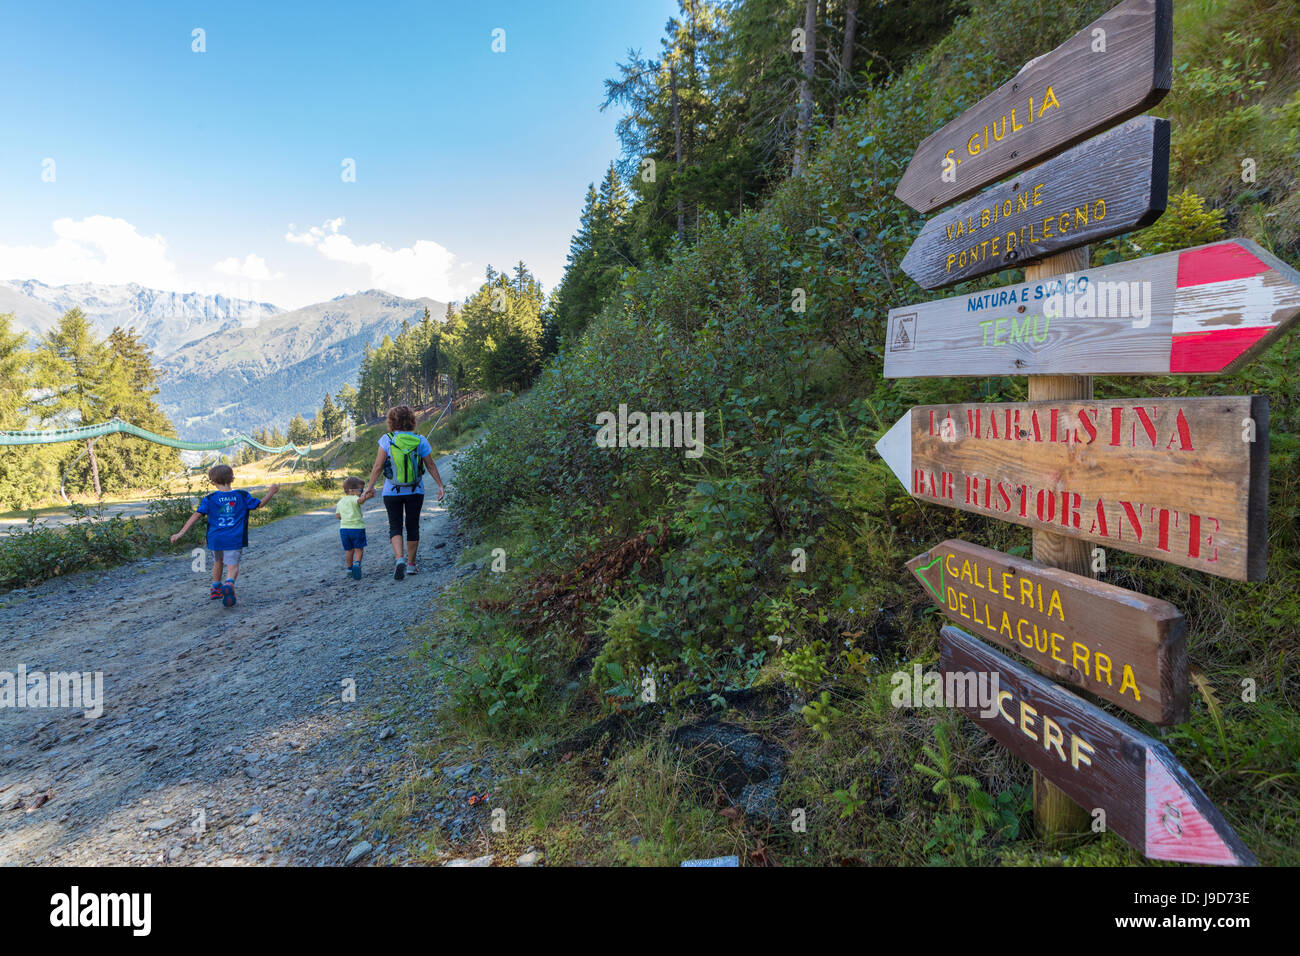 Hikers walk on the alpine path surrounded by woods, Ponte Di Legno, Camonica Valley, province of Brescia, Lombardy, Italy Stock Photo